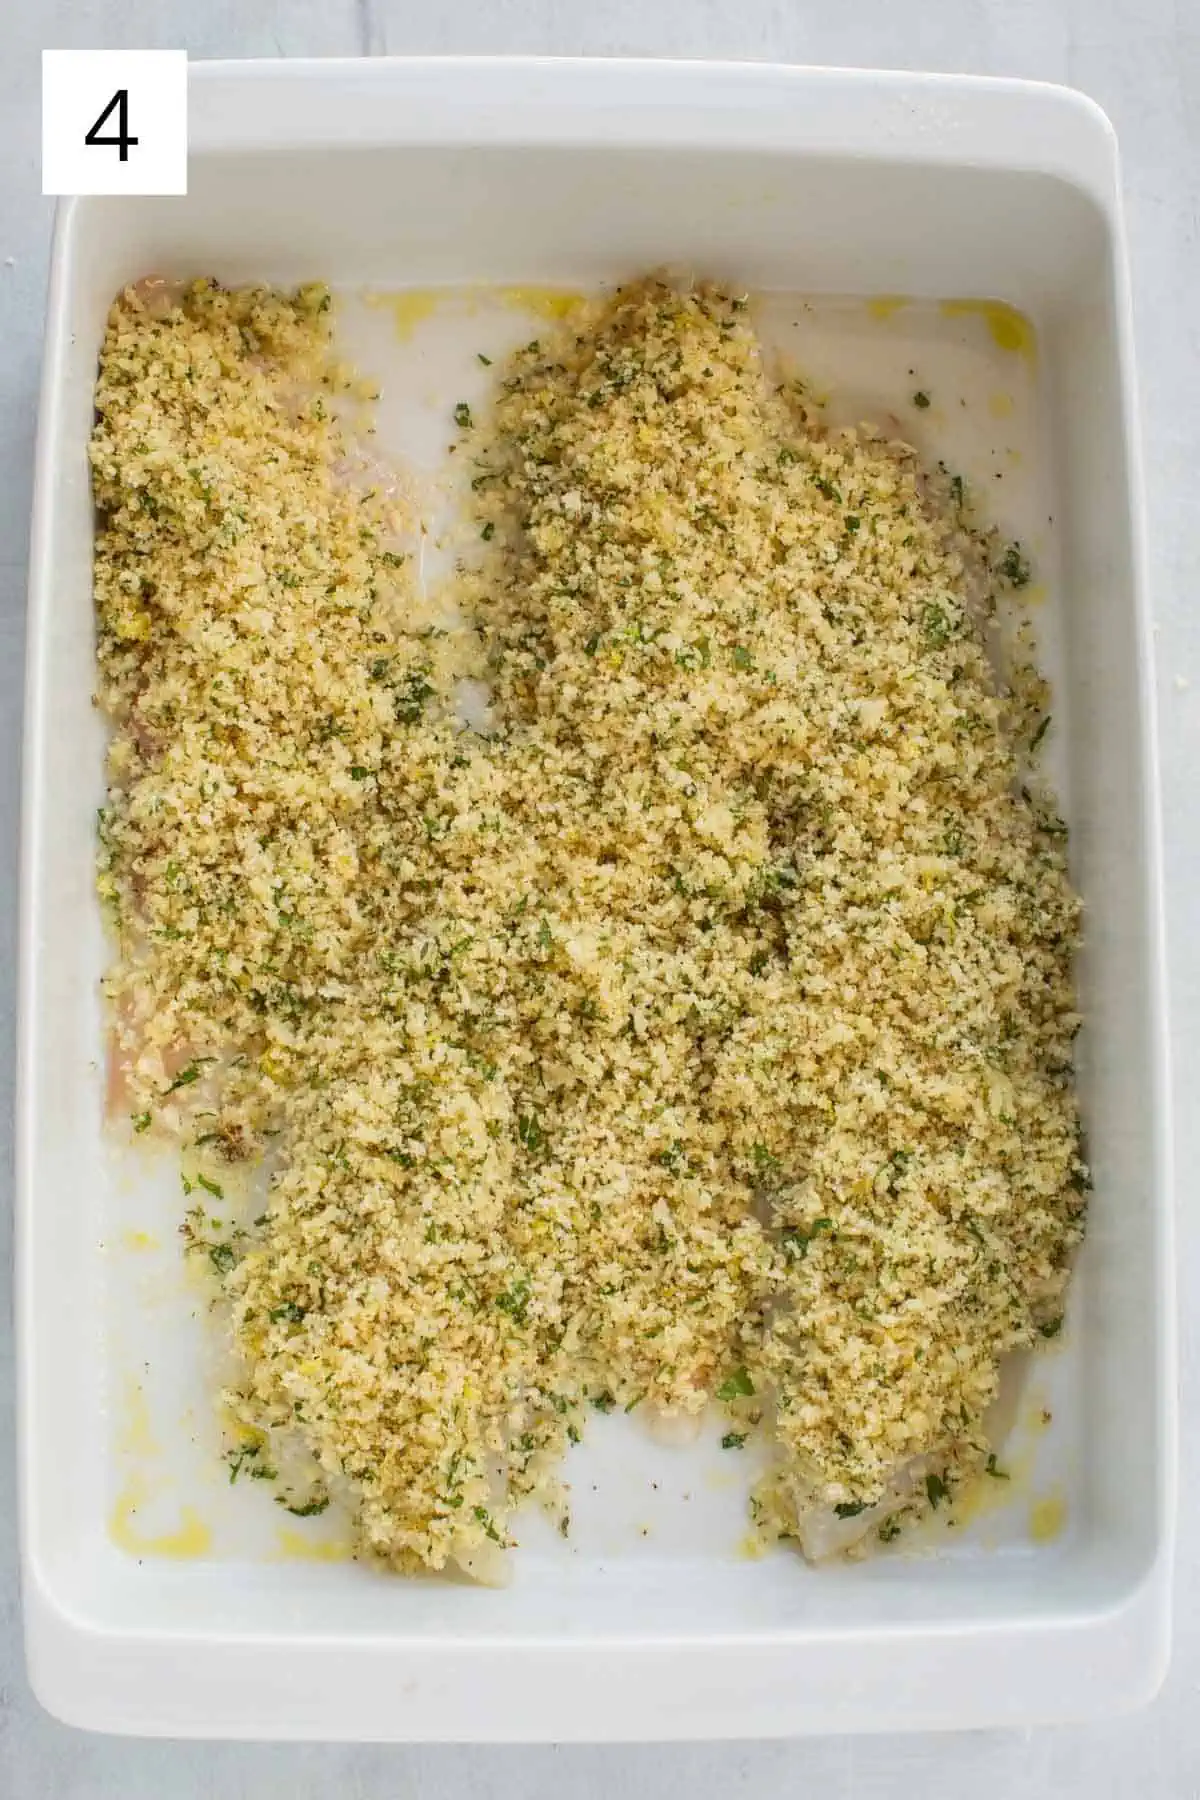 Flounder fillets in a baking dish topped with seasoned breadcrumbs before being baked.